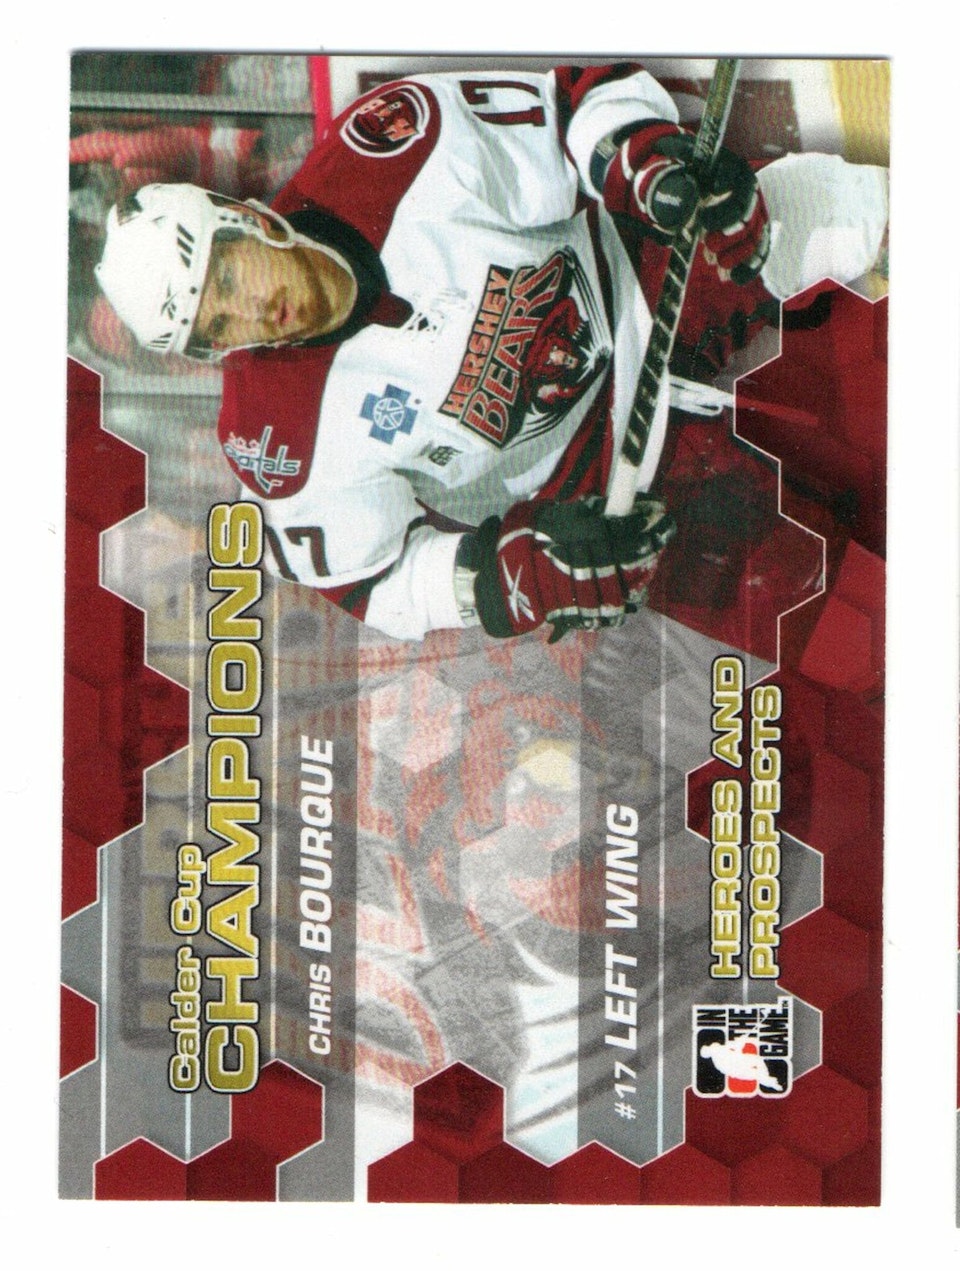 2010-11 ITG Heroes and Prospects Calder Cup Champions #CC02 Chris Bourque (25-182x2-CAPITALS)